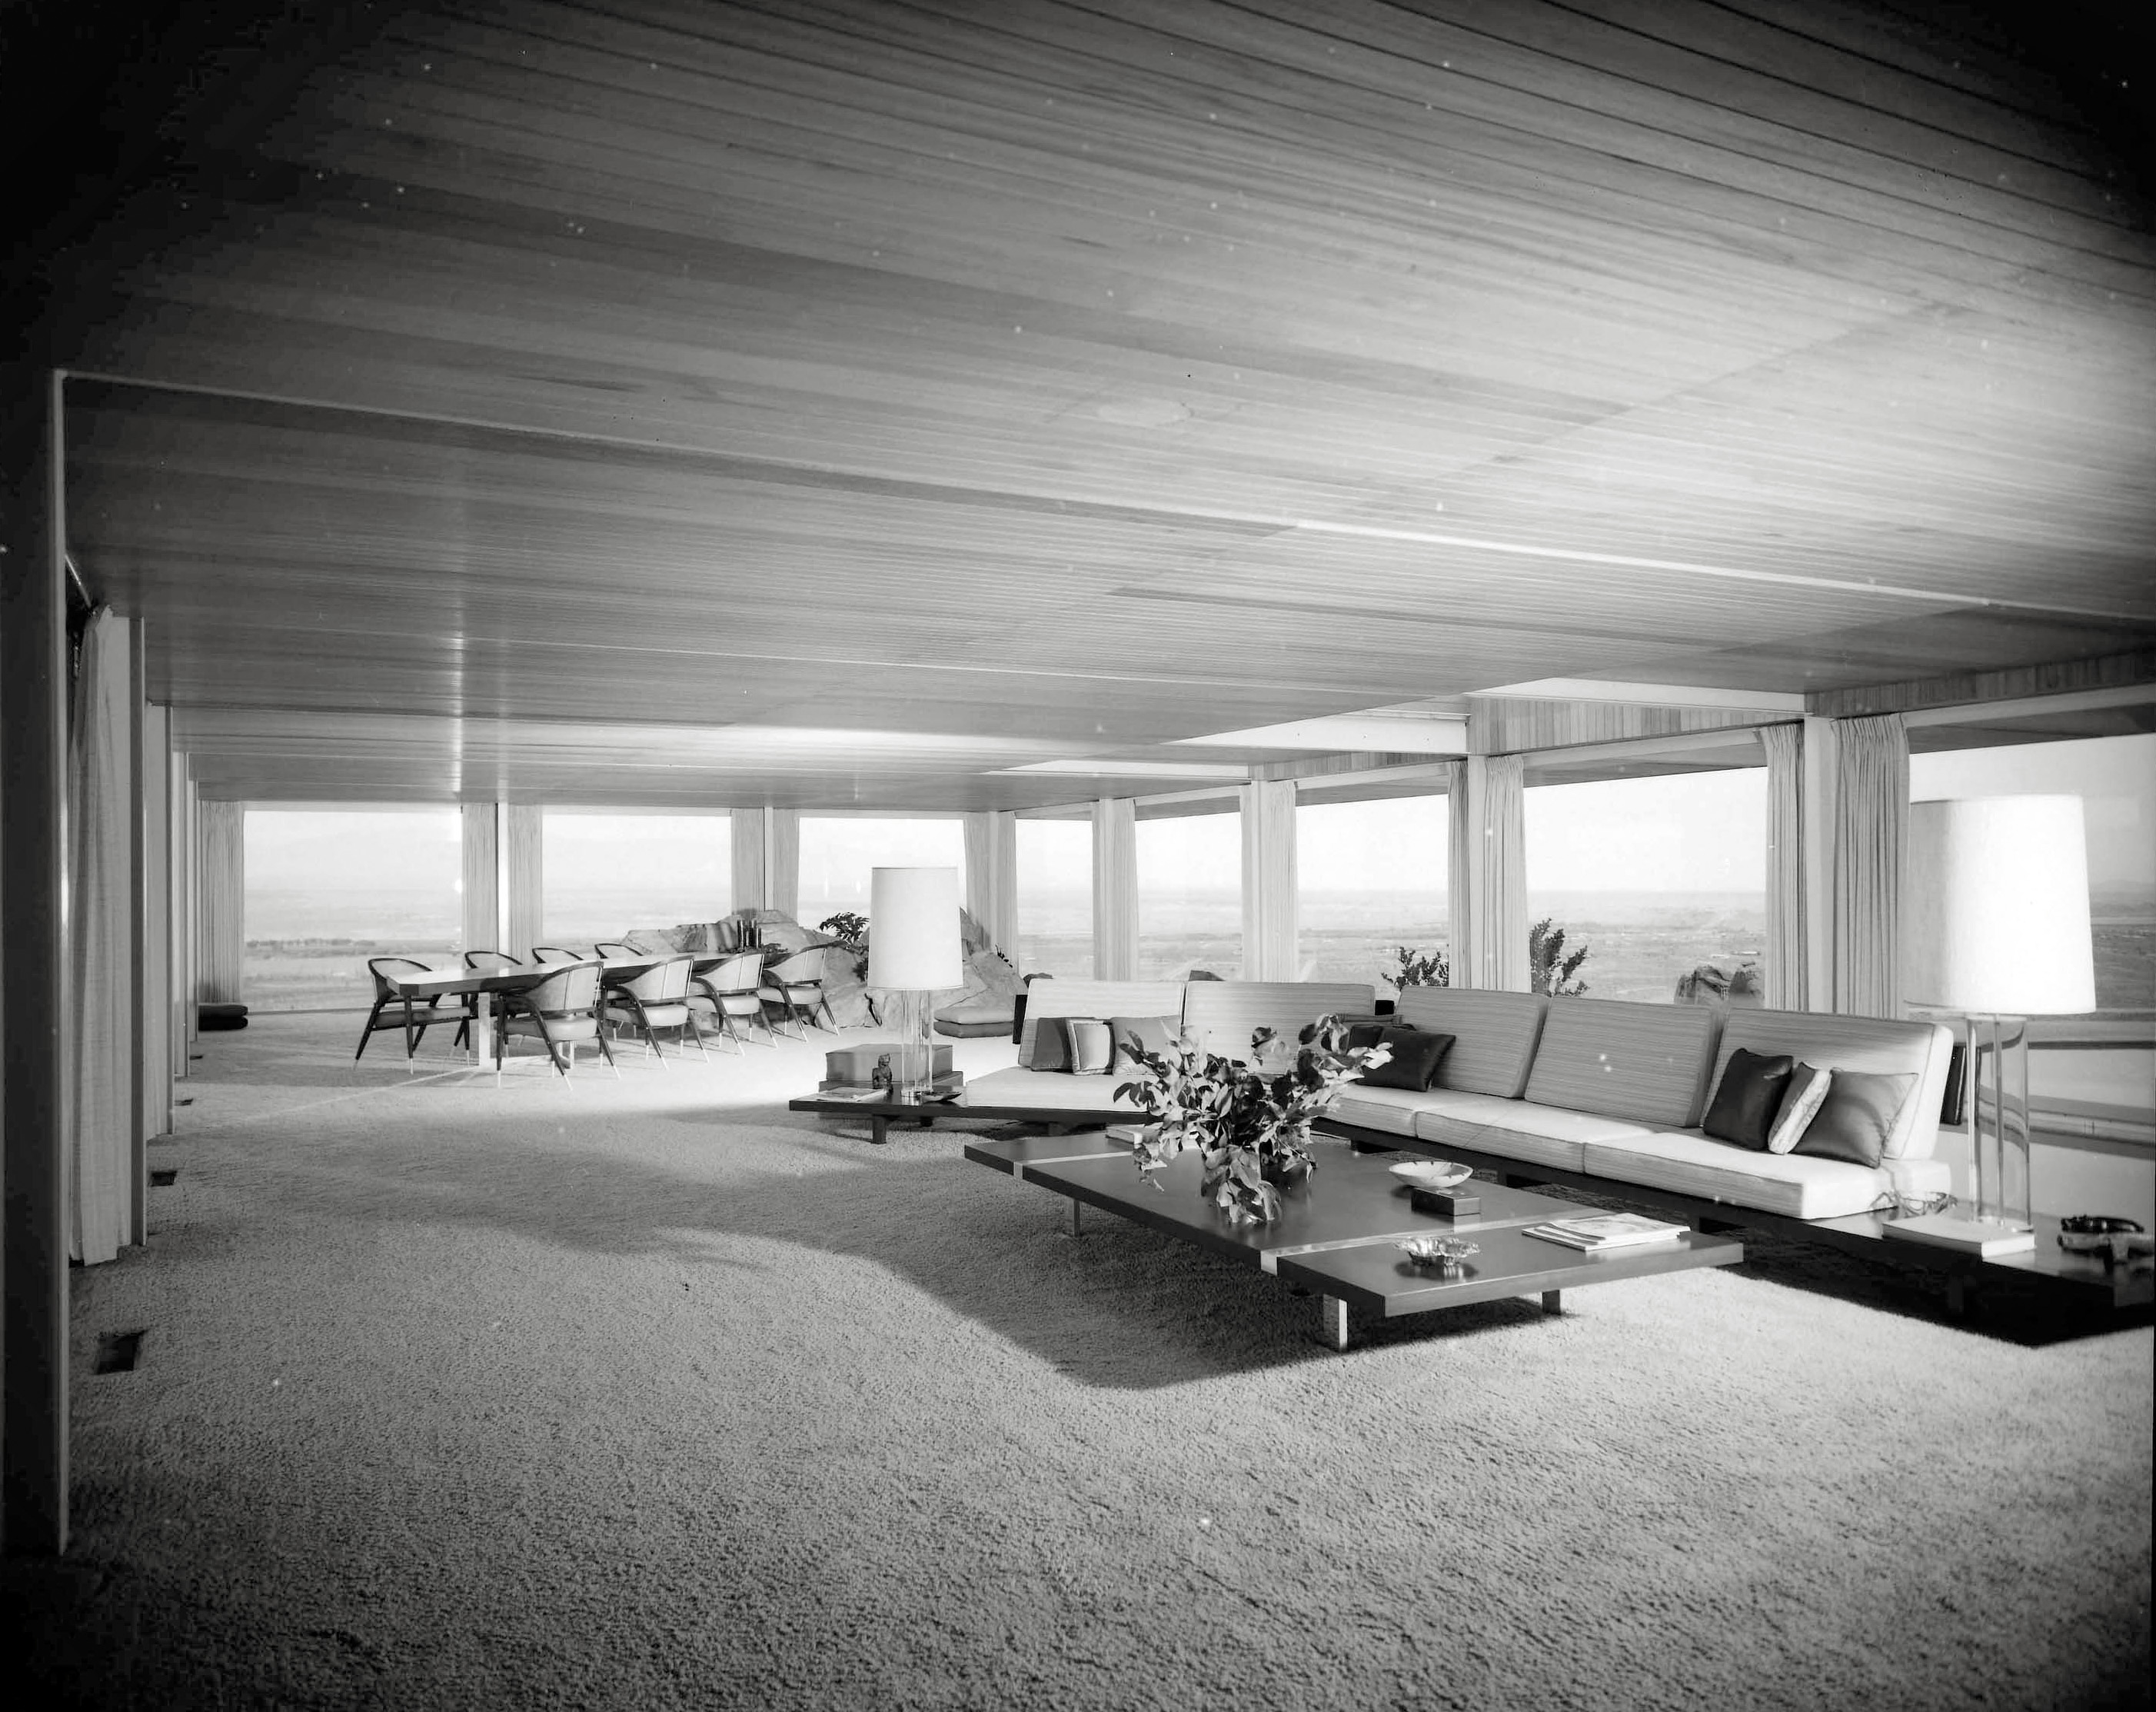 October 1960. Apple Valley, California. "Hilltop House. Newton T. Bass residence, living room. Francisco Artigas, architect." Besides the view, the focal point of this room seems to be a conference table colliding with an iceberg. From photos by Maynard L. Parker for Pictorial California and House Beautiful ("Look What's Happening to Showers!"). Source: Huntington Library. View full size.